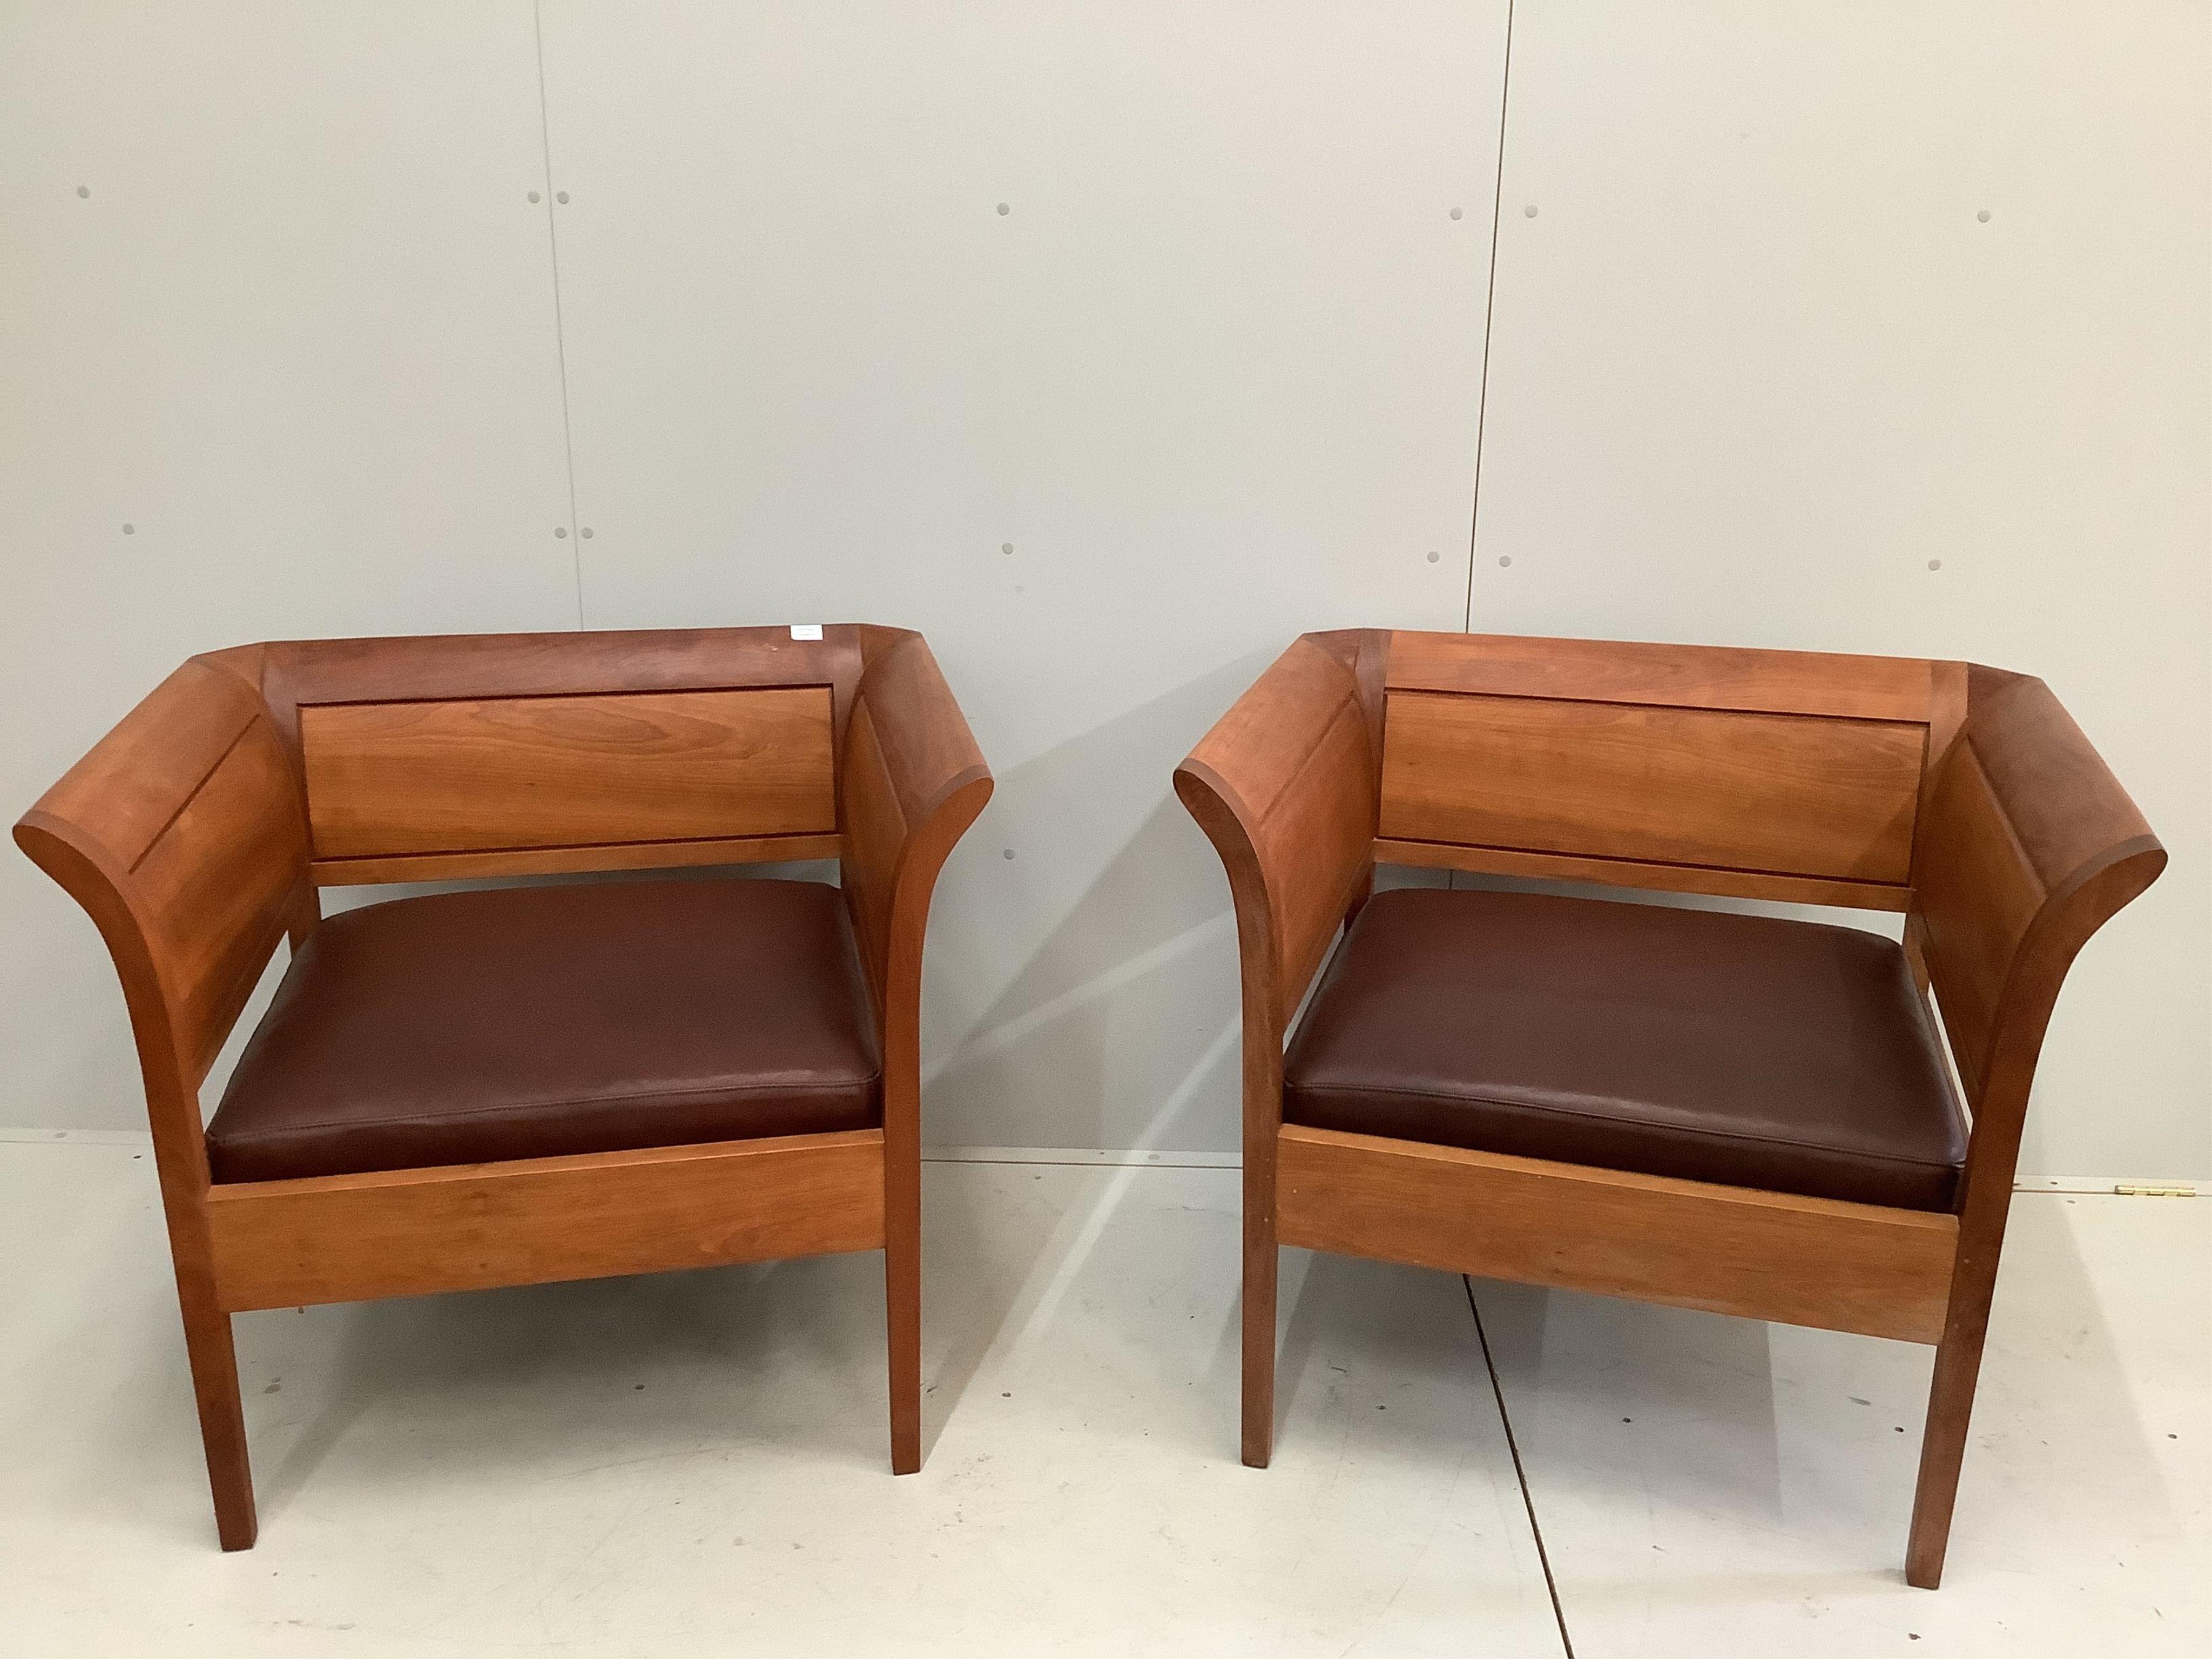 A pair of Thomas Moser cherrywood ‘Sofia Lounge chairs’, leather seats, width 89cm, depth 77cm, height 80cm. Condition - good